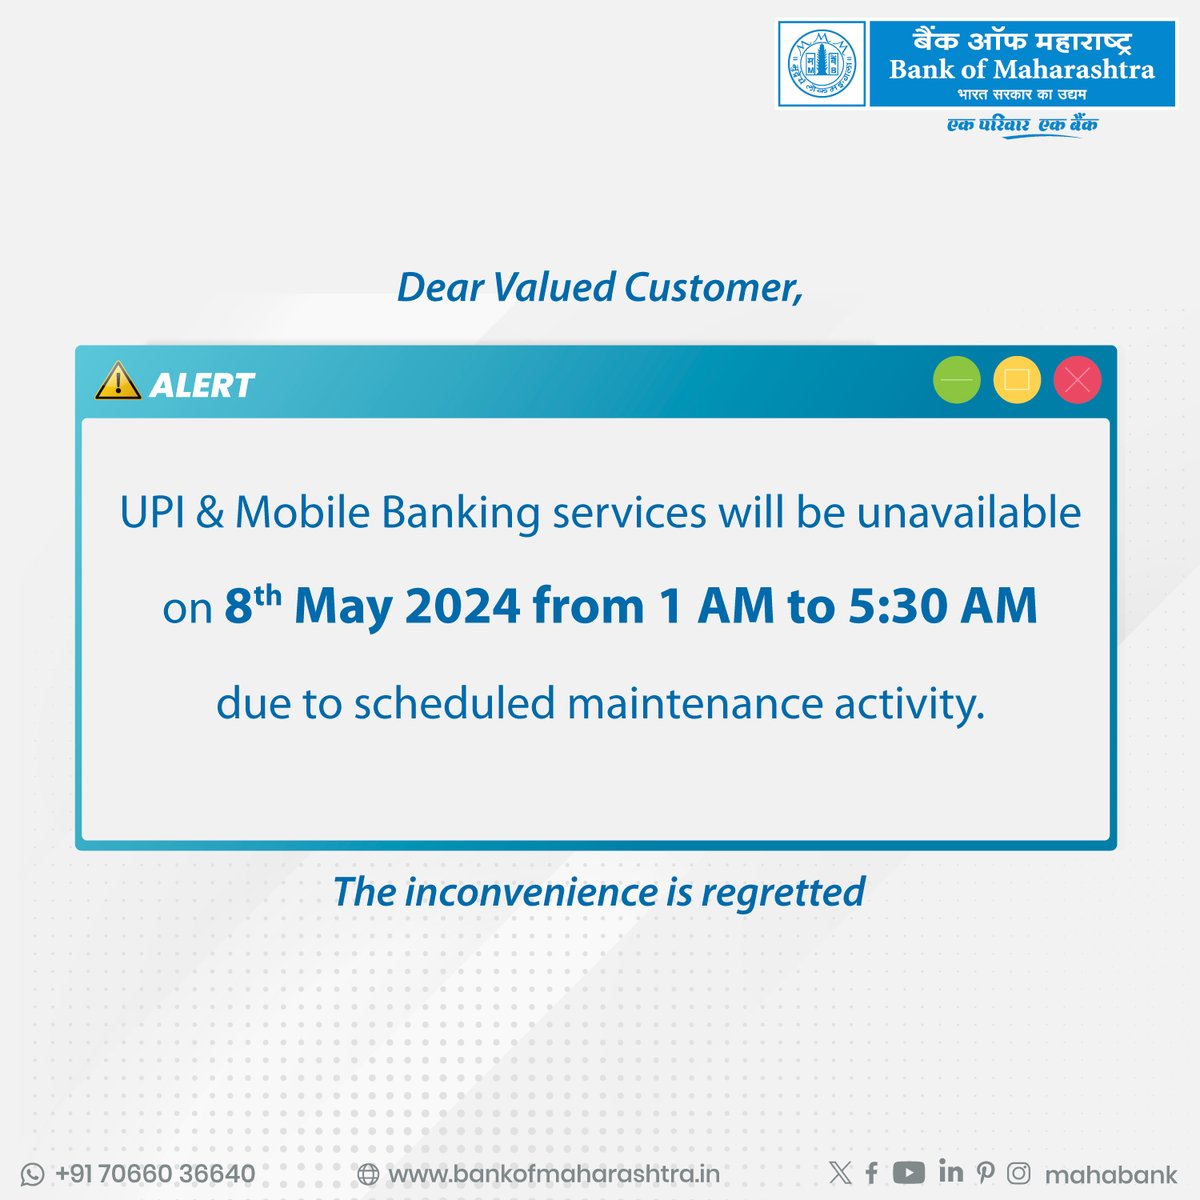 UPI and Mobile Banking services will be unavailable on 8th May 2024 from 1:00 AM to 5:30 AM due to scheduled maintenance activity. Inconvenience is regretted. 

#BankofMaharashtra #Mahabank #alert #bankingupdates #maintenance #downtime #bankingalert